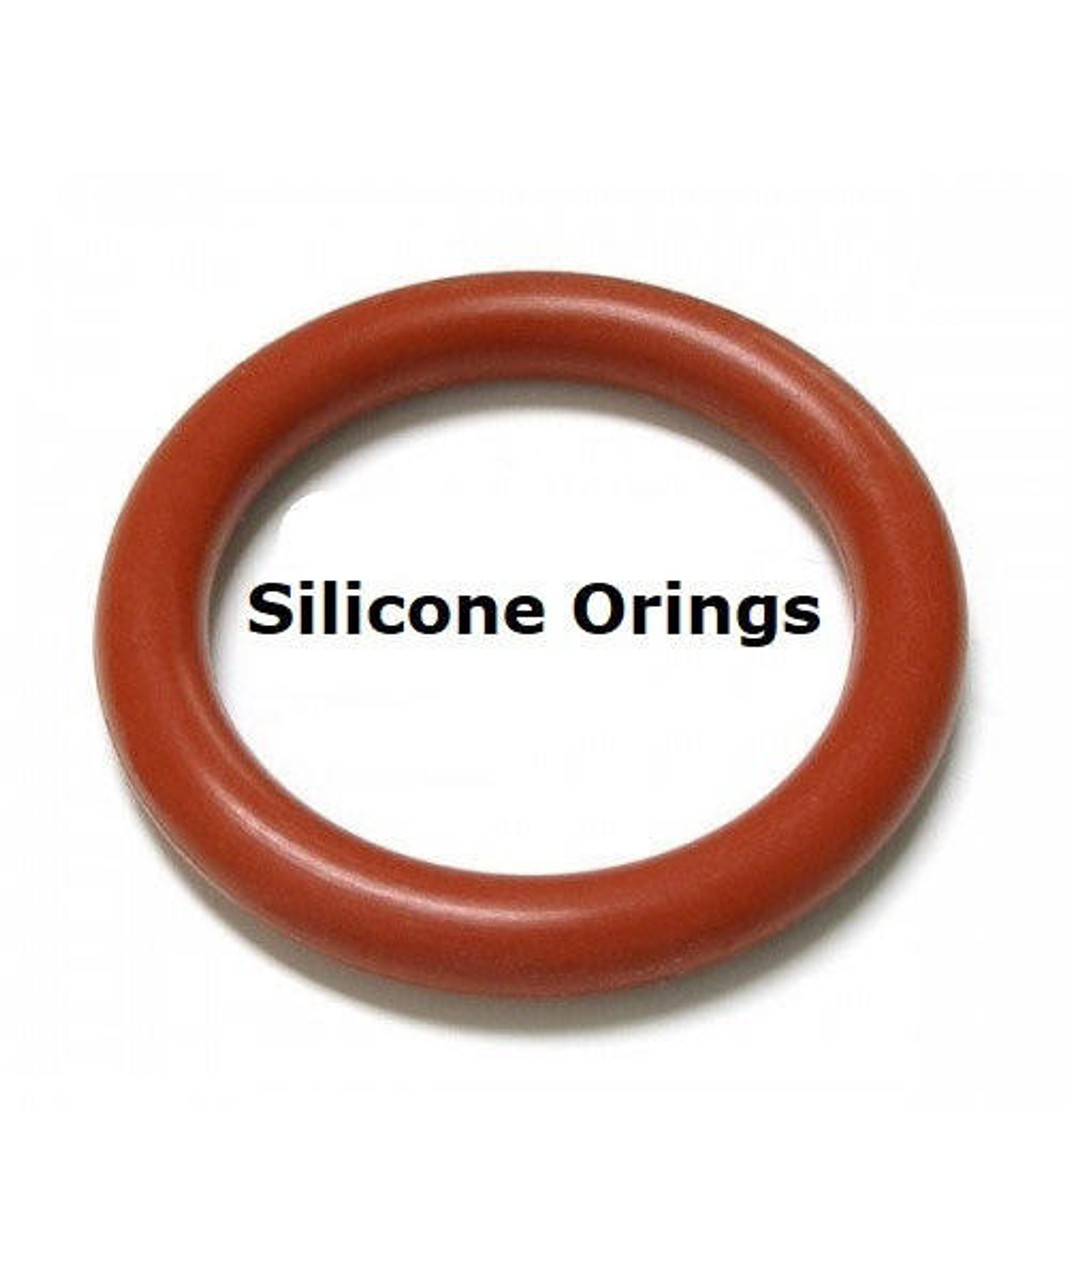 Silicone O-rings Size 340 Price for 1 pc